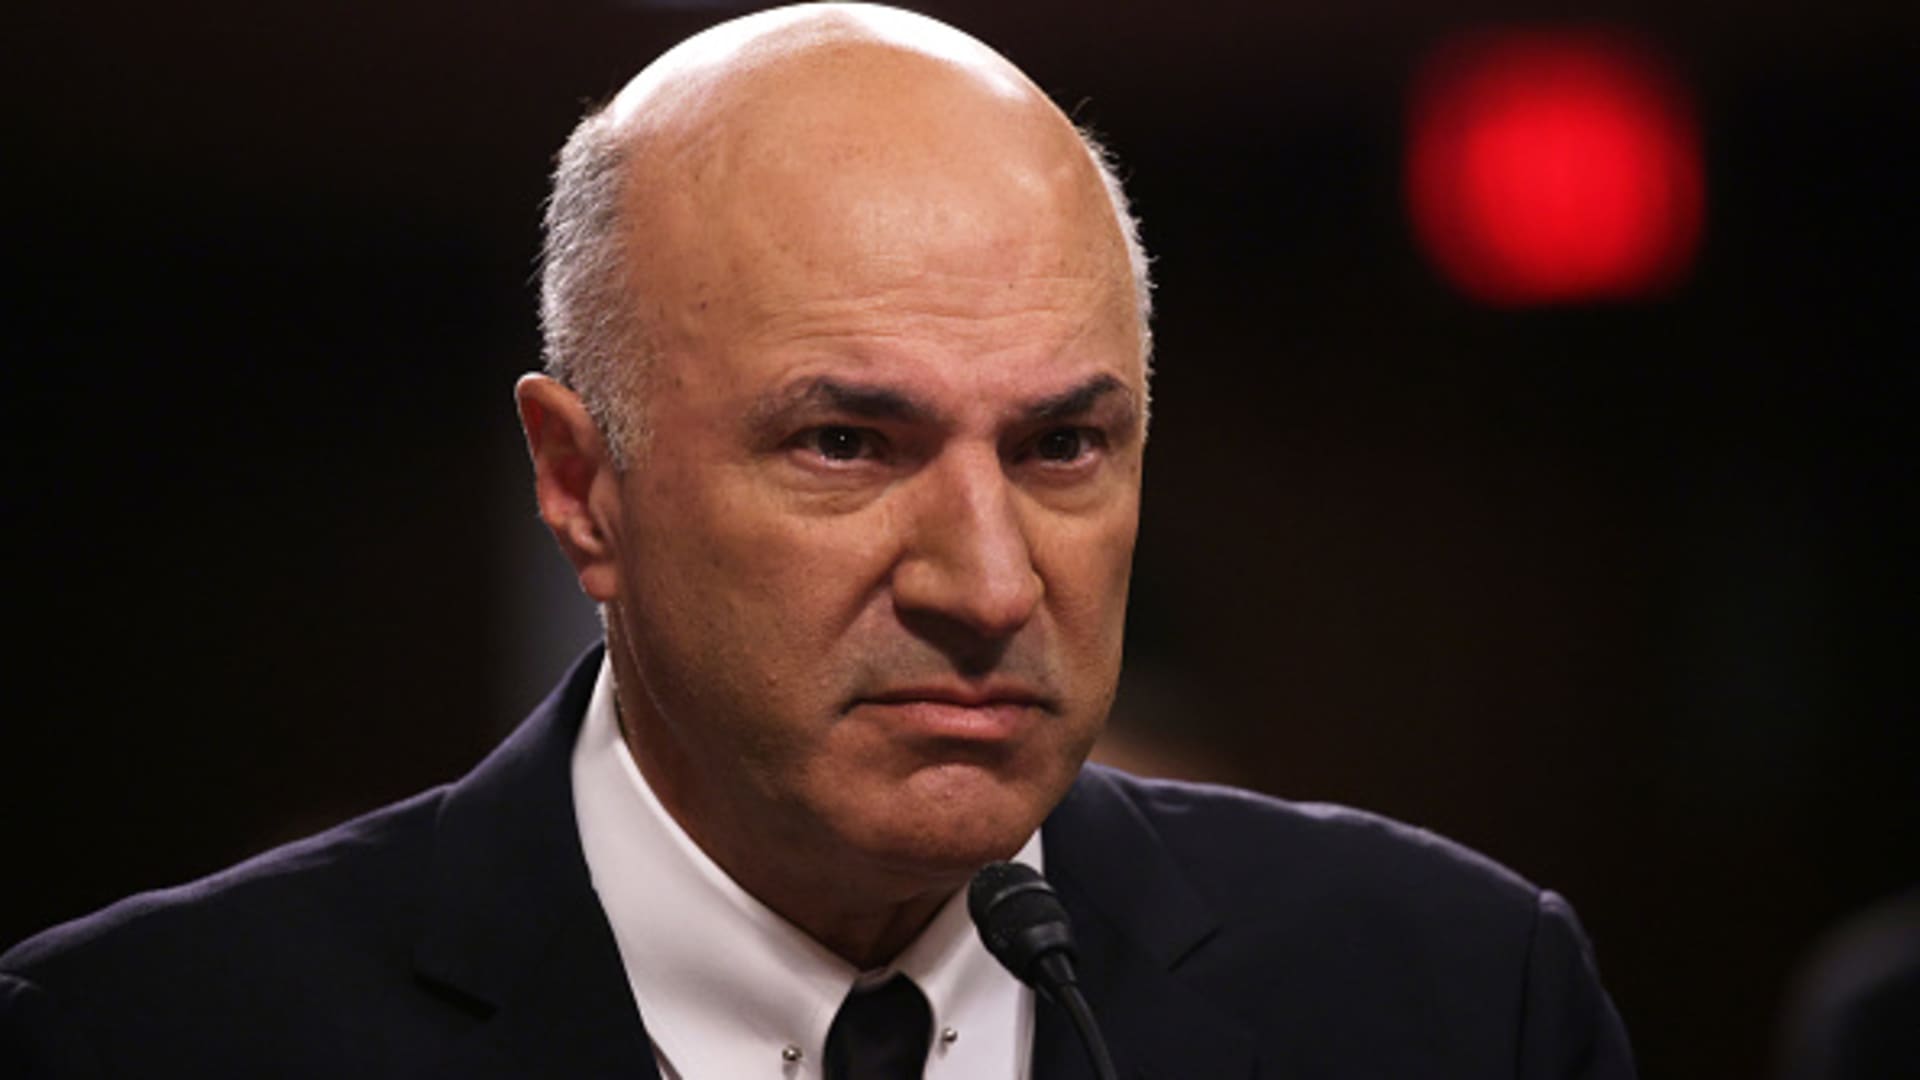 ‘Things are going to break’: Kevin O’Leary predicts Fed hikes will lead to more U.S. regional bank failures